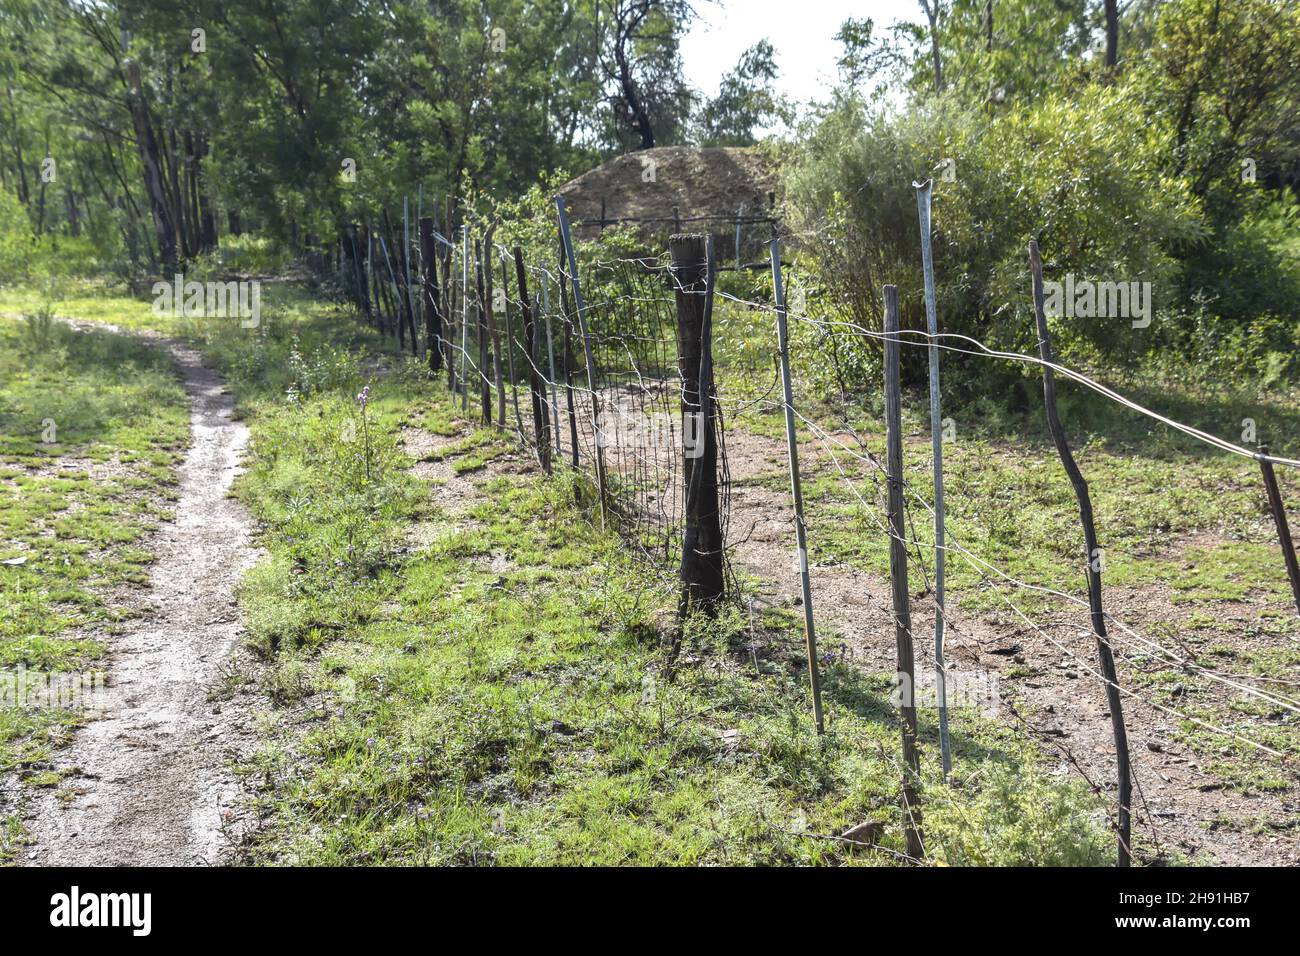 An improvised fence made of wood and barbed wire on a farm in Eastern Pretoria South Africa to keep cattle out of a garden with red soil and grass in Stock Photo